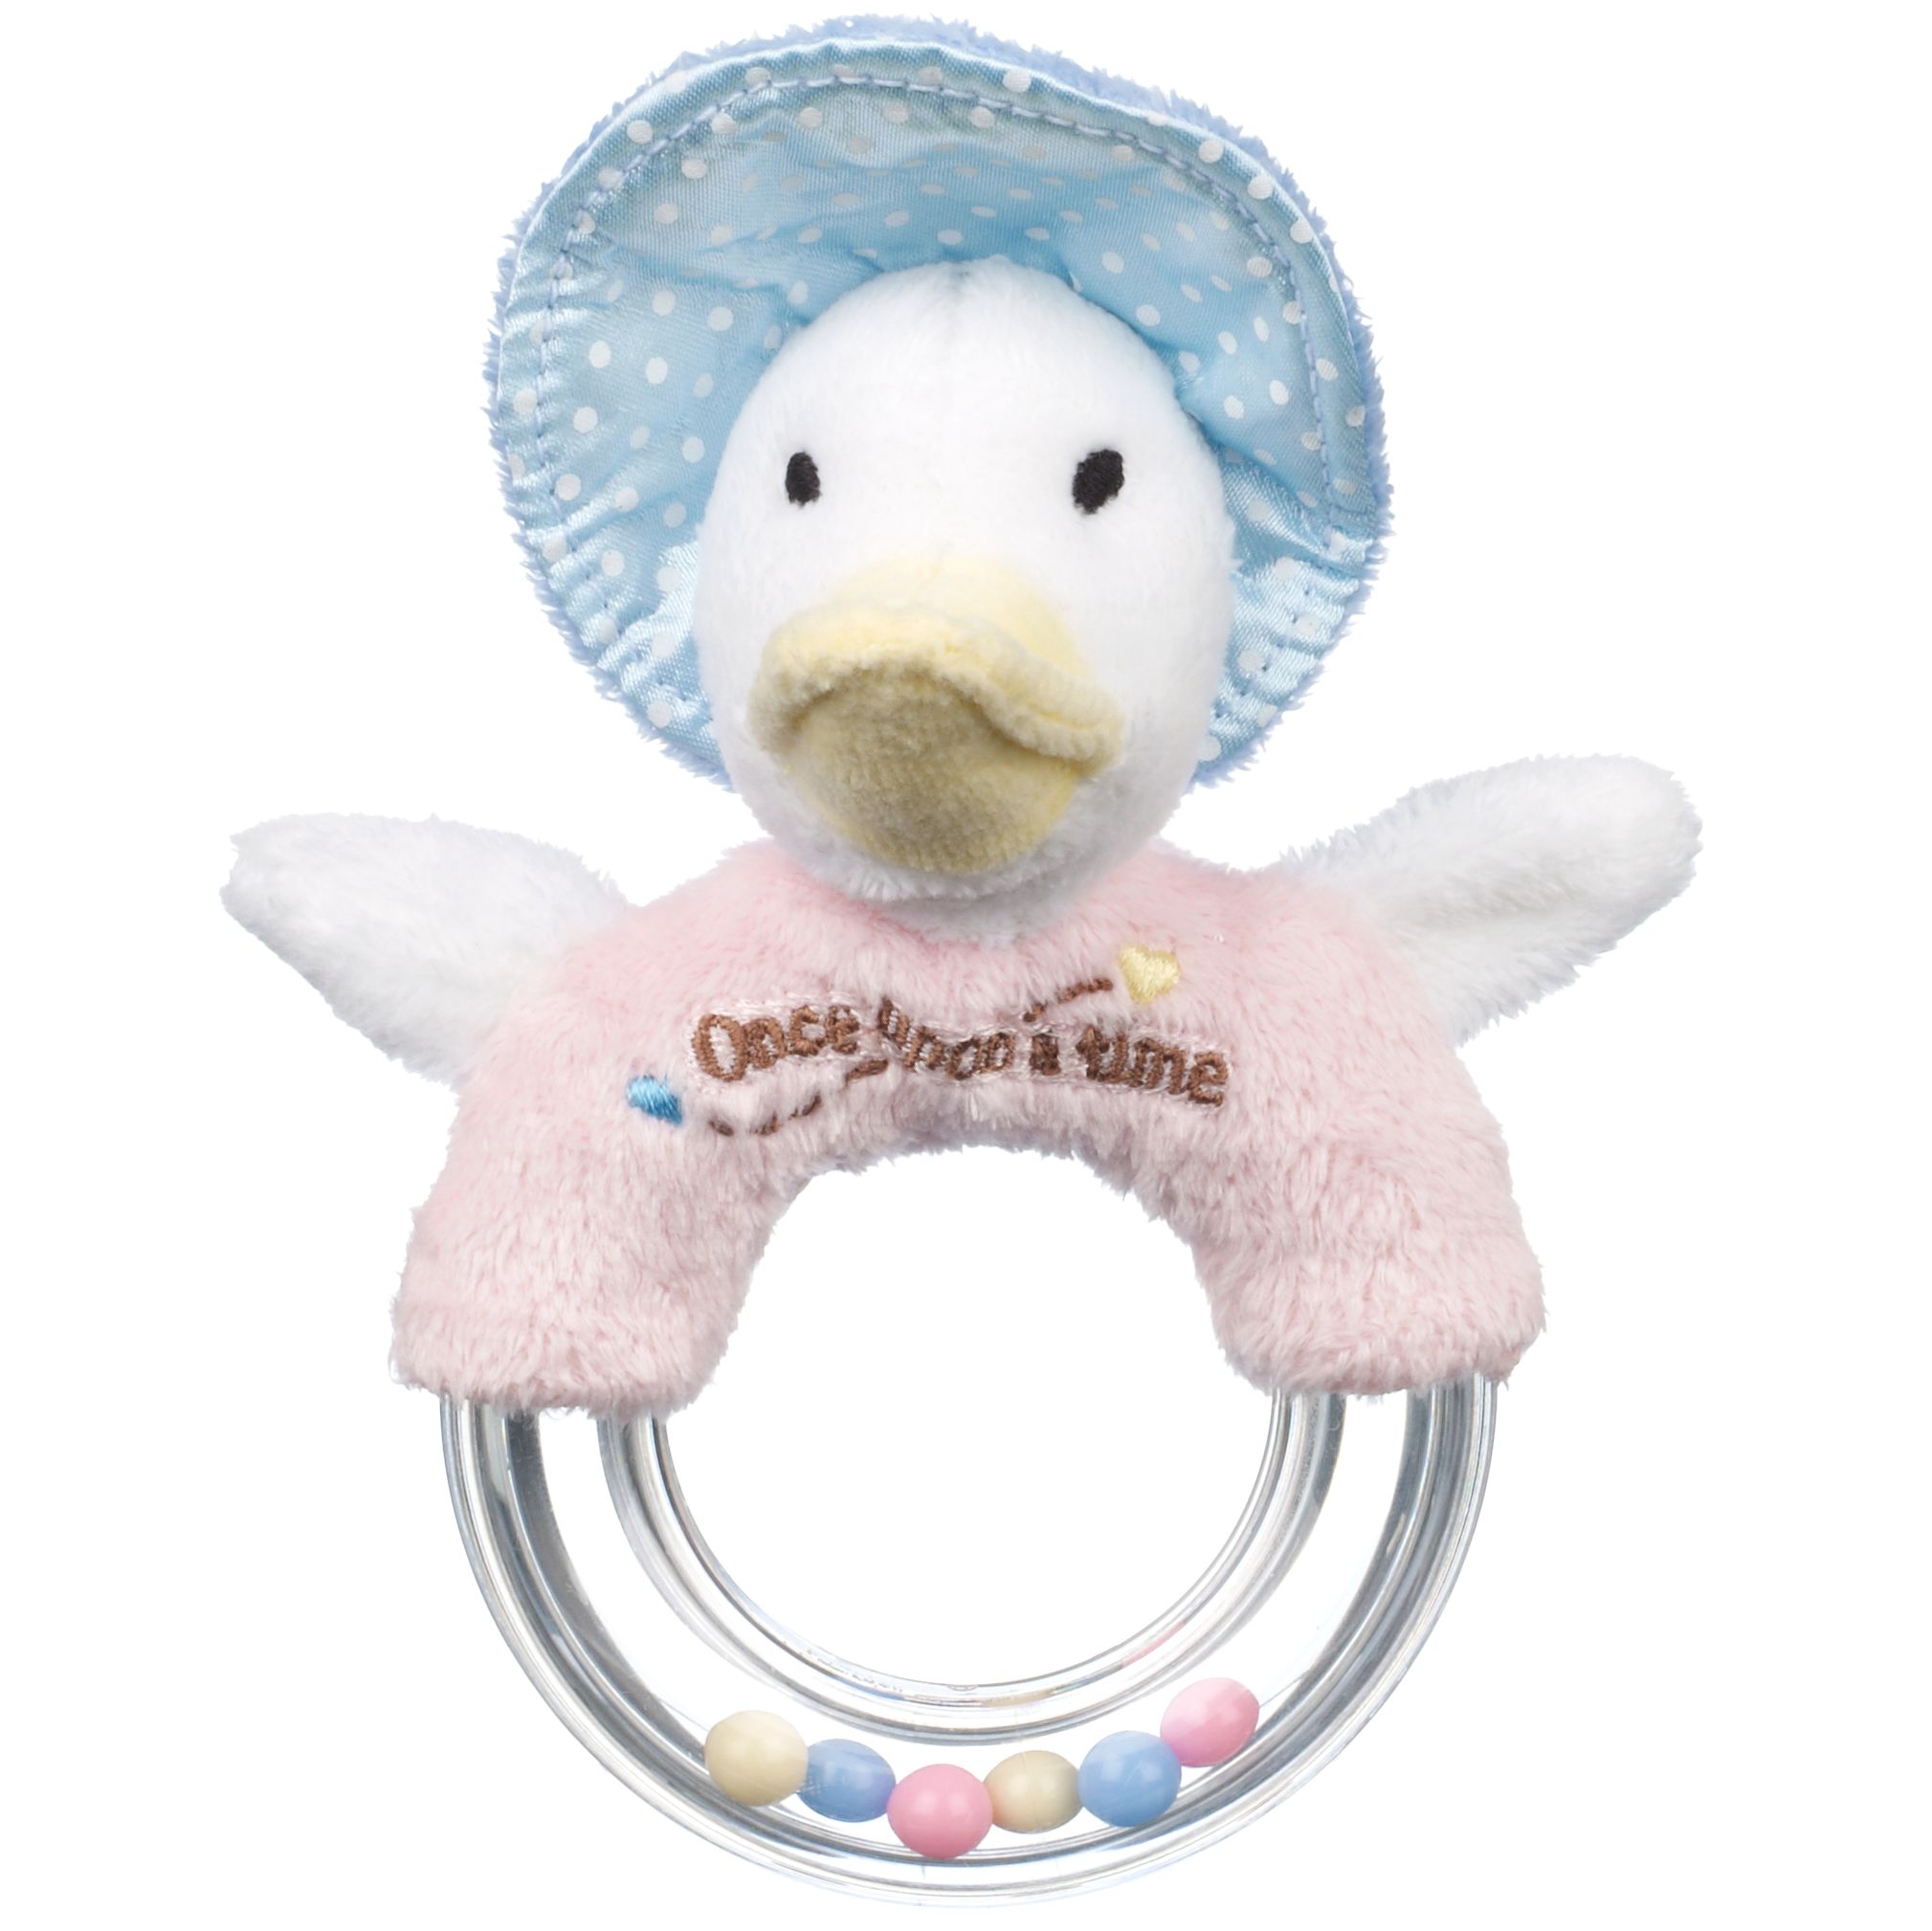 John Lewis Beatrix Potter Character Ring Rattle, Assorted